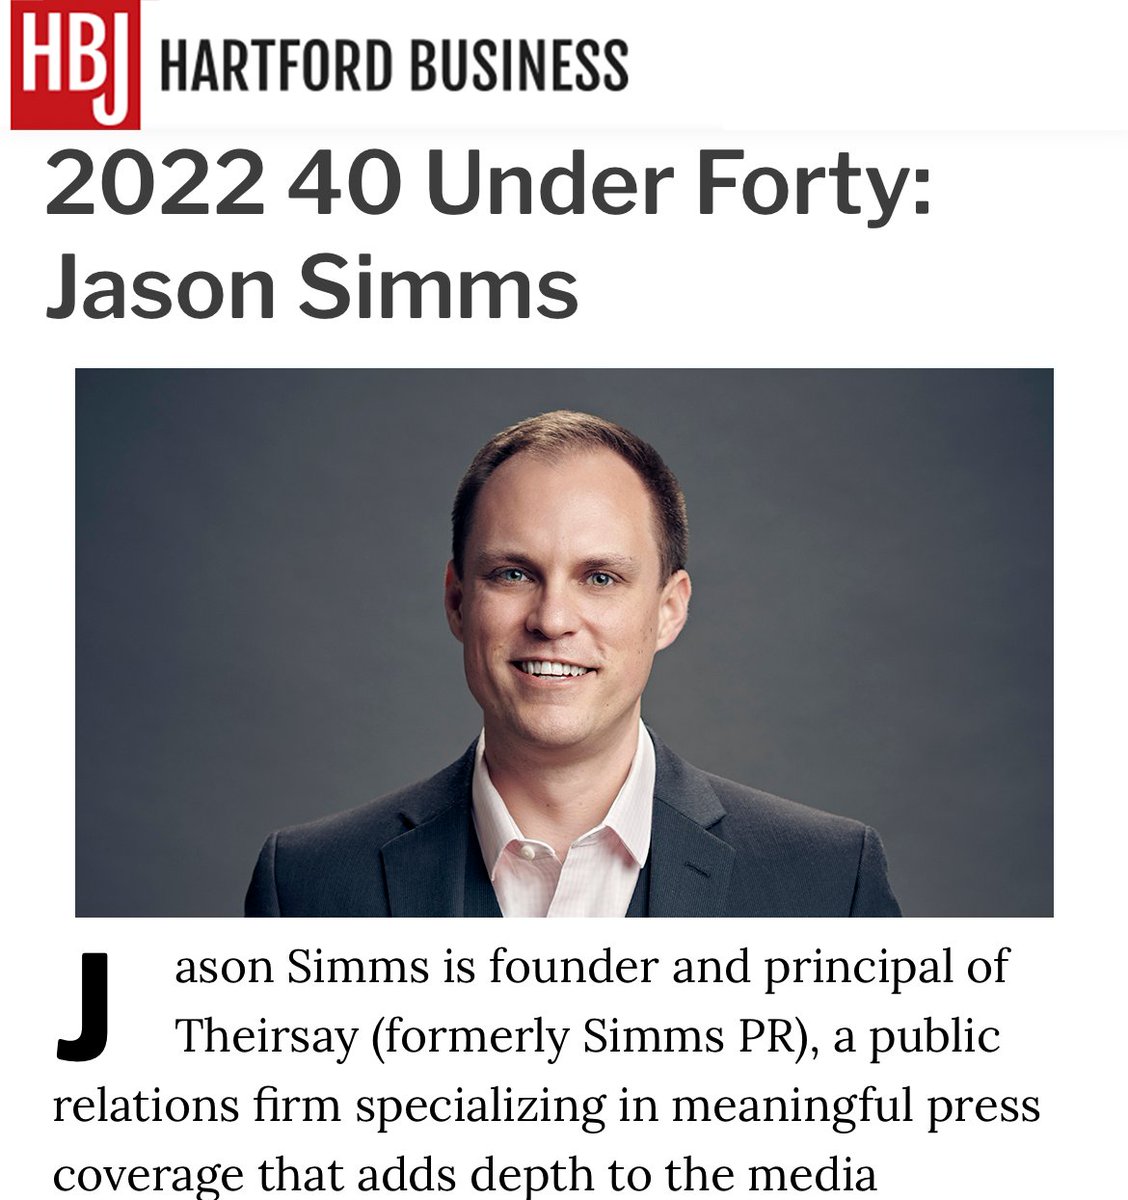 After moving to CT a decade ago, I can't imagine a better place to start a company or family. Thank you to the Hartford-area business community for welcoming me in and giving me the chance to build @Theirsay. hartfordbusiness.com/article/2022-4… @HartfordBiz